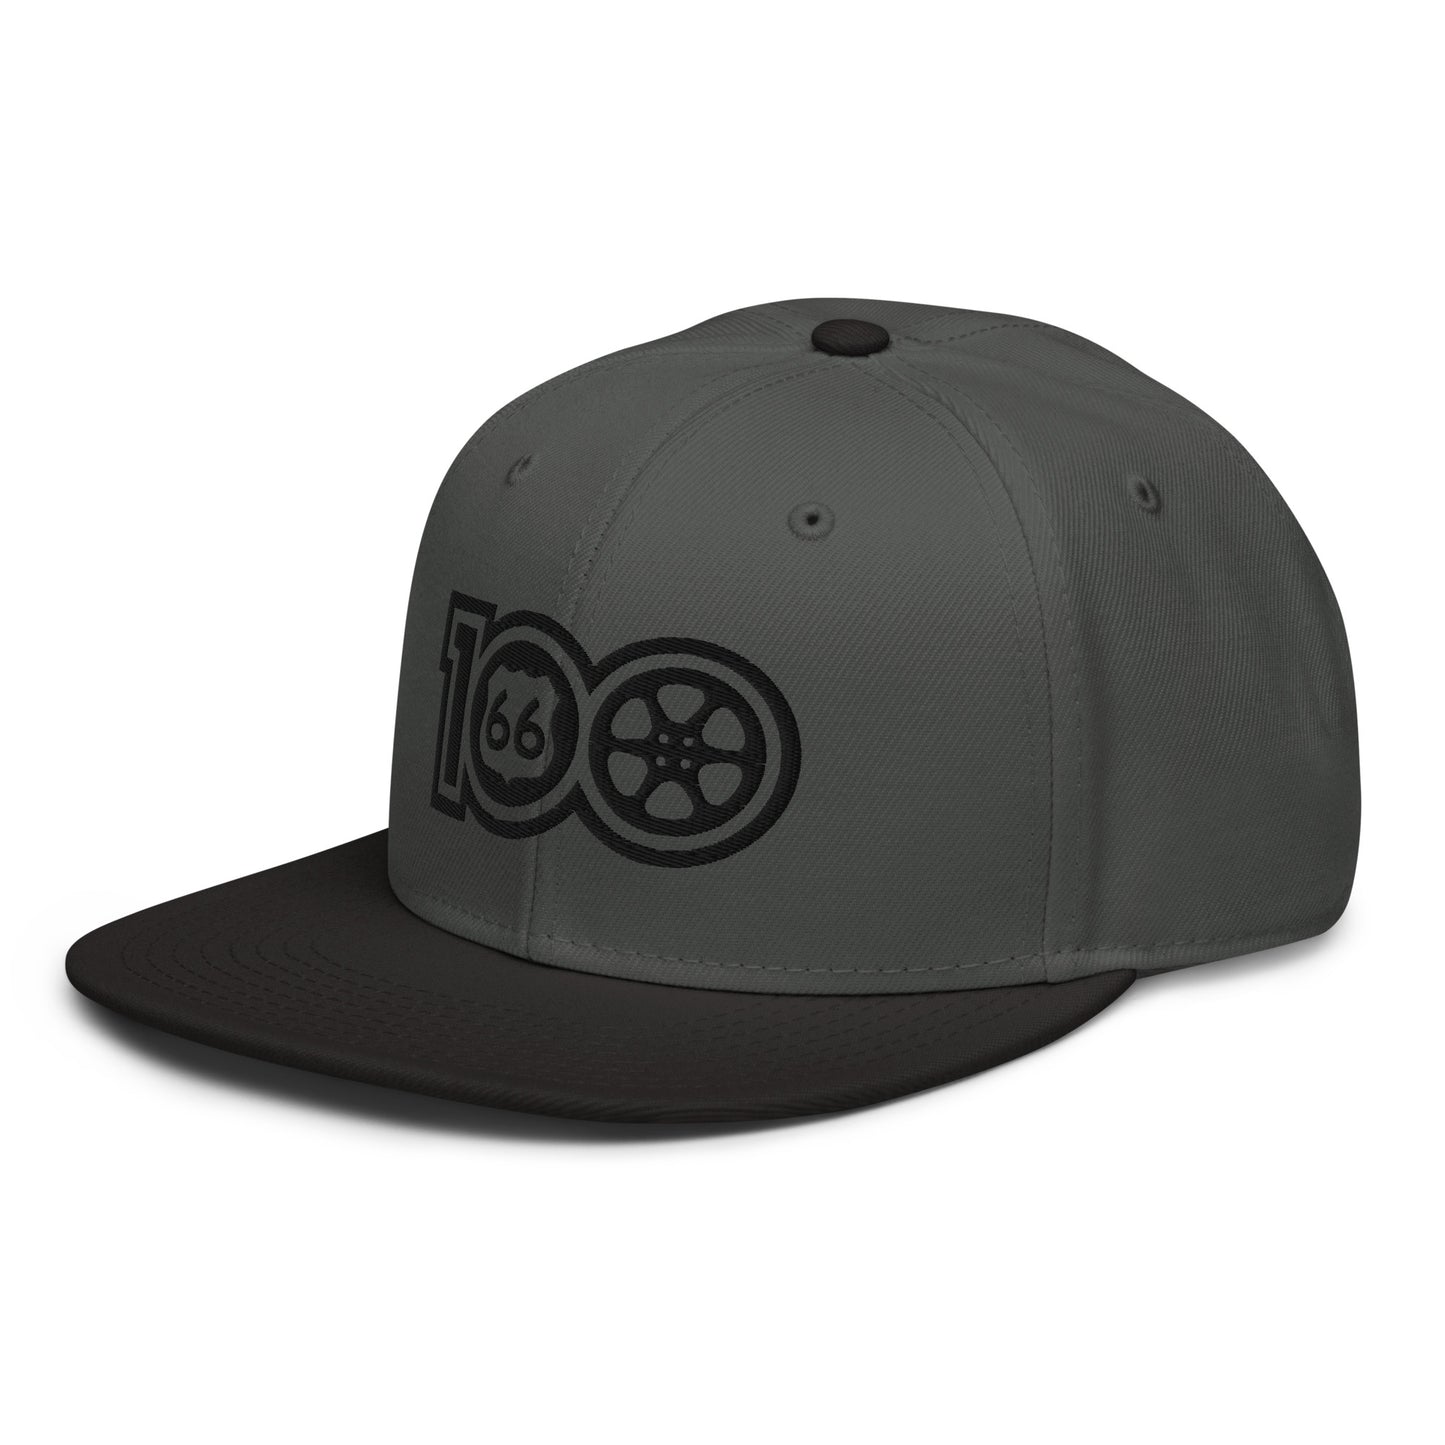 Route 66 Film Crew Hat - Black Logo on Charcoal Hat